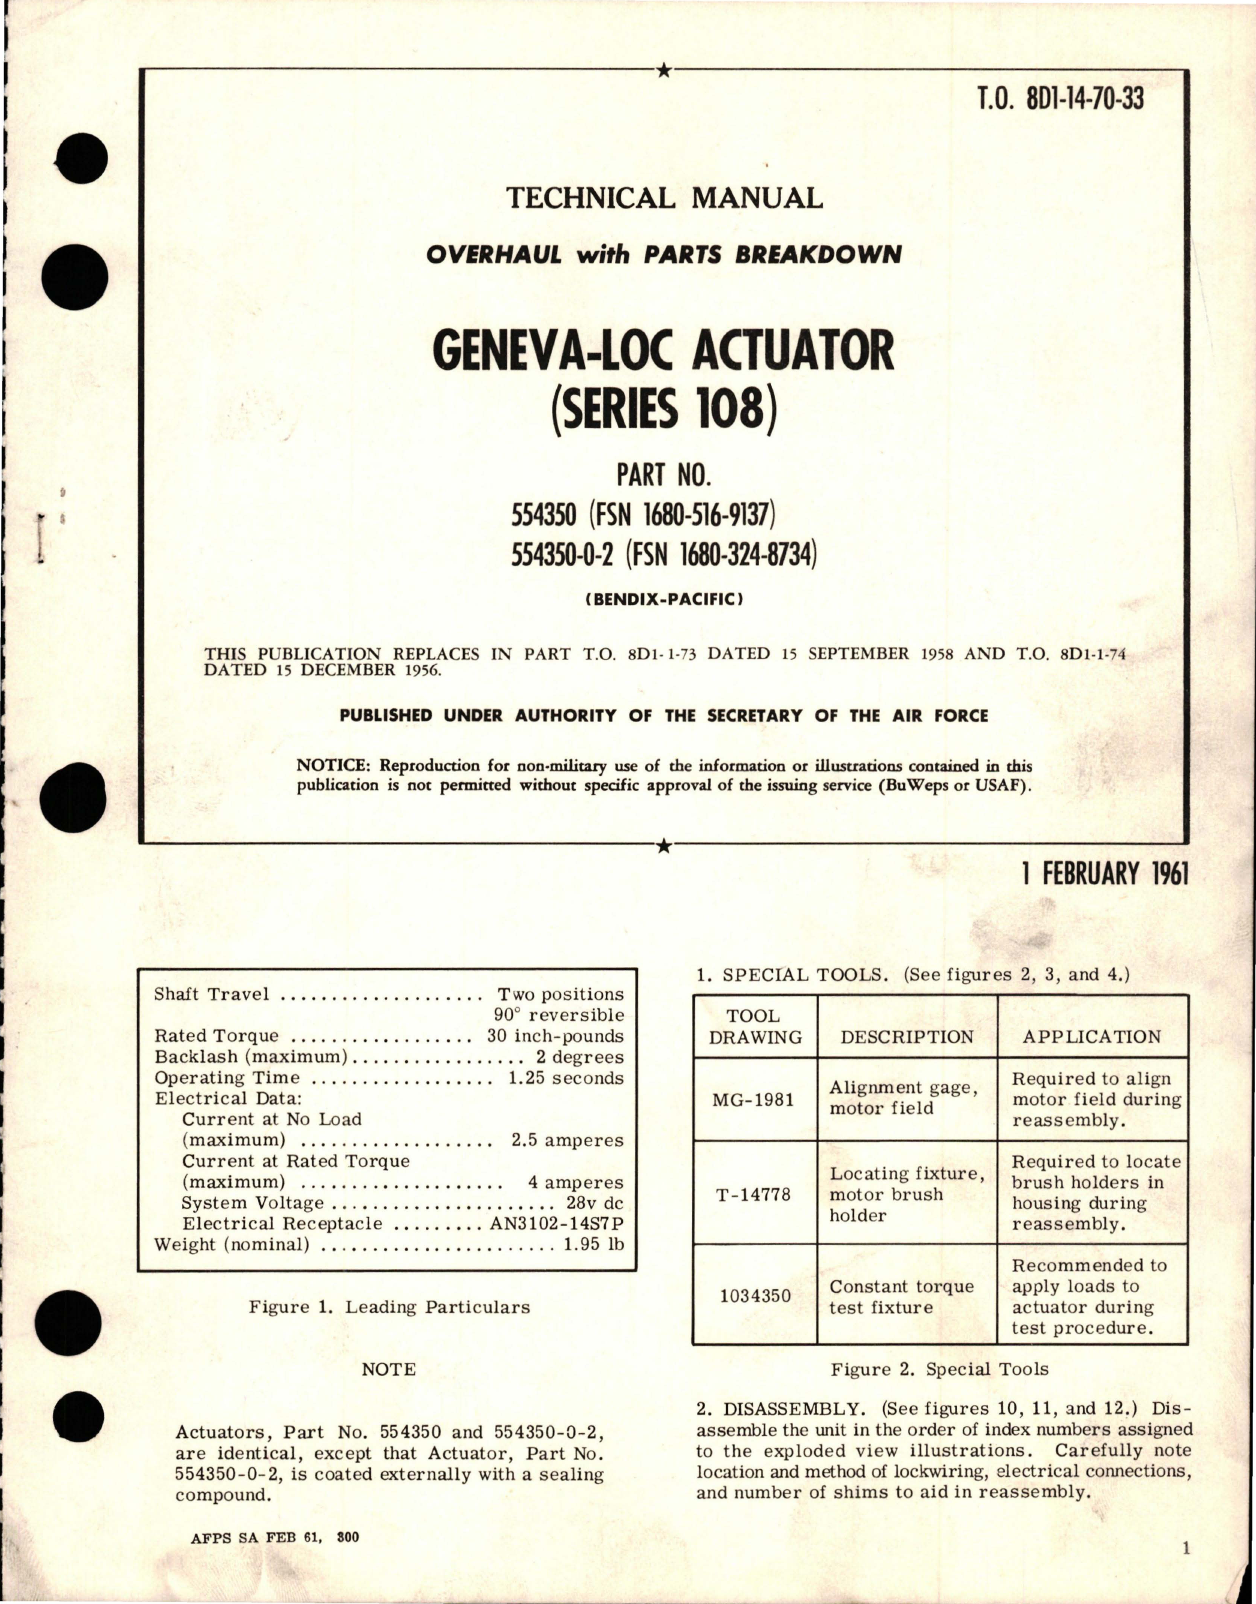 Sample page 1 from AirCorps Library document: Overhaul with Parts Breakdown for Geneva-Loc Actuator - Series 108, Parts 554350 and 554350-0-2